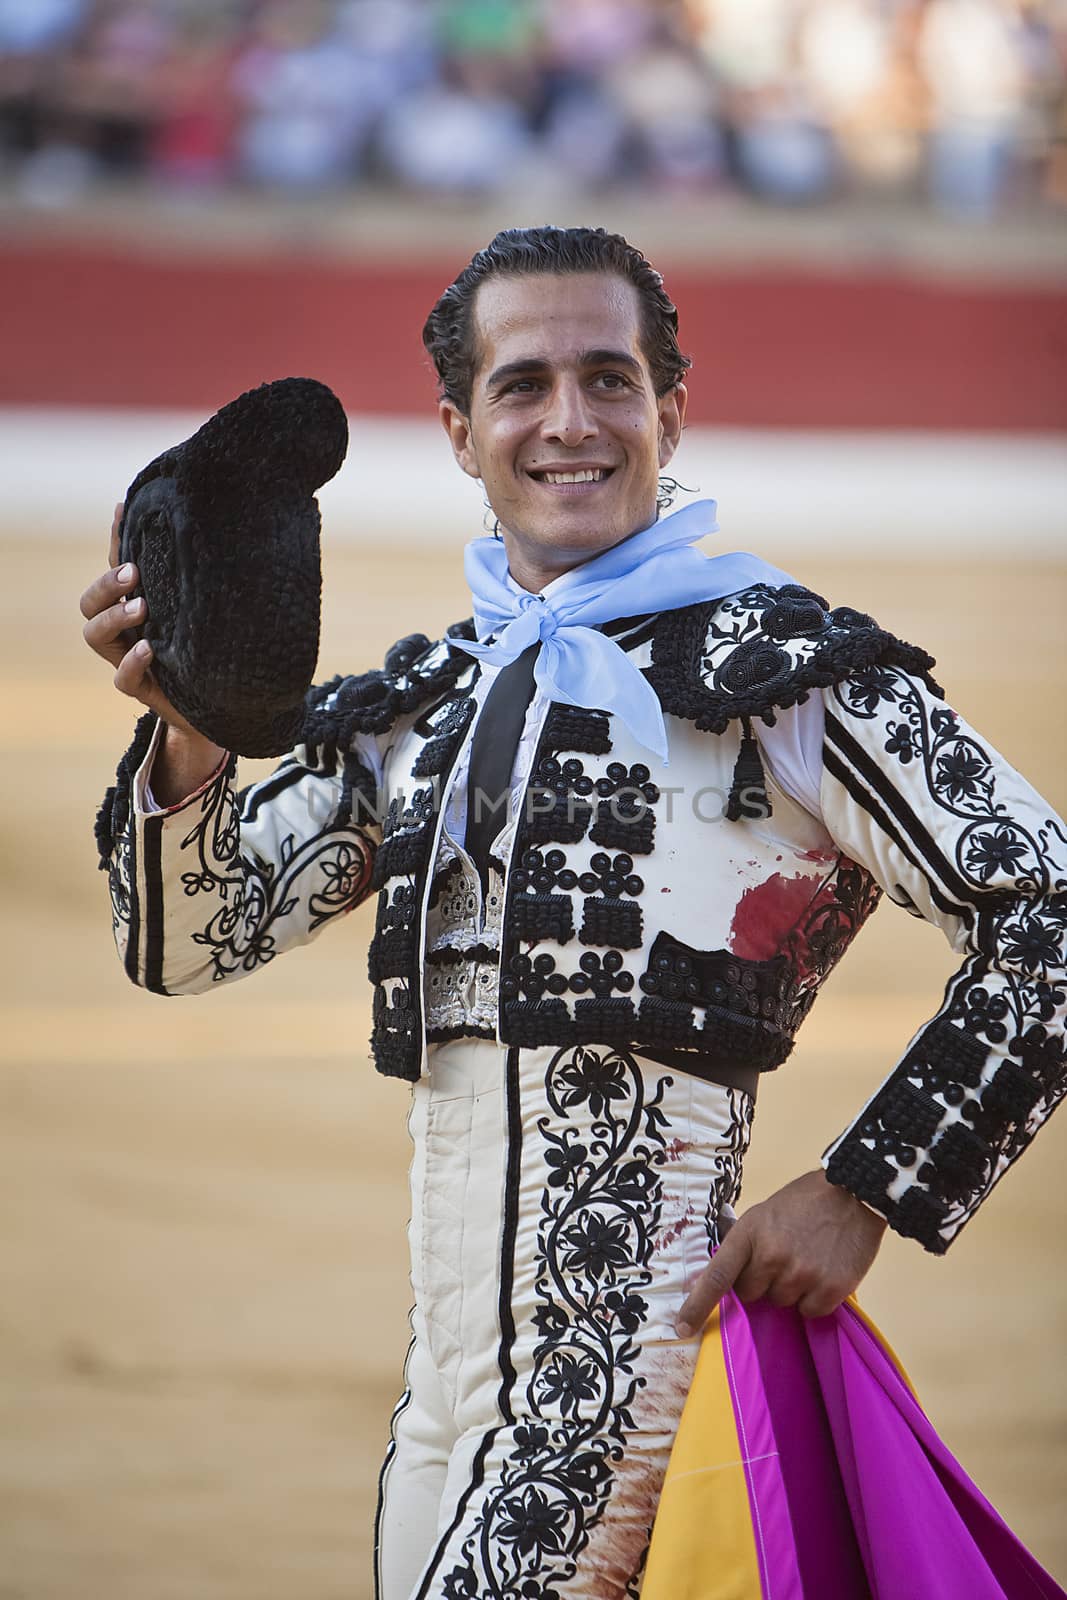 Baeza, Jaen province, SPAIN - 15 august 2010: Bullfighter Ivan Fandiño to the turning of honour with montera hat in his hand in the Bullring of Baeza, Jaen province, Andalusia, Spain